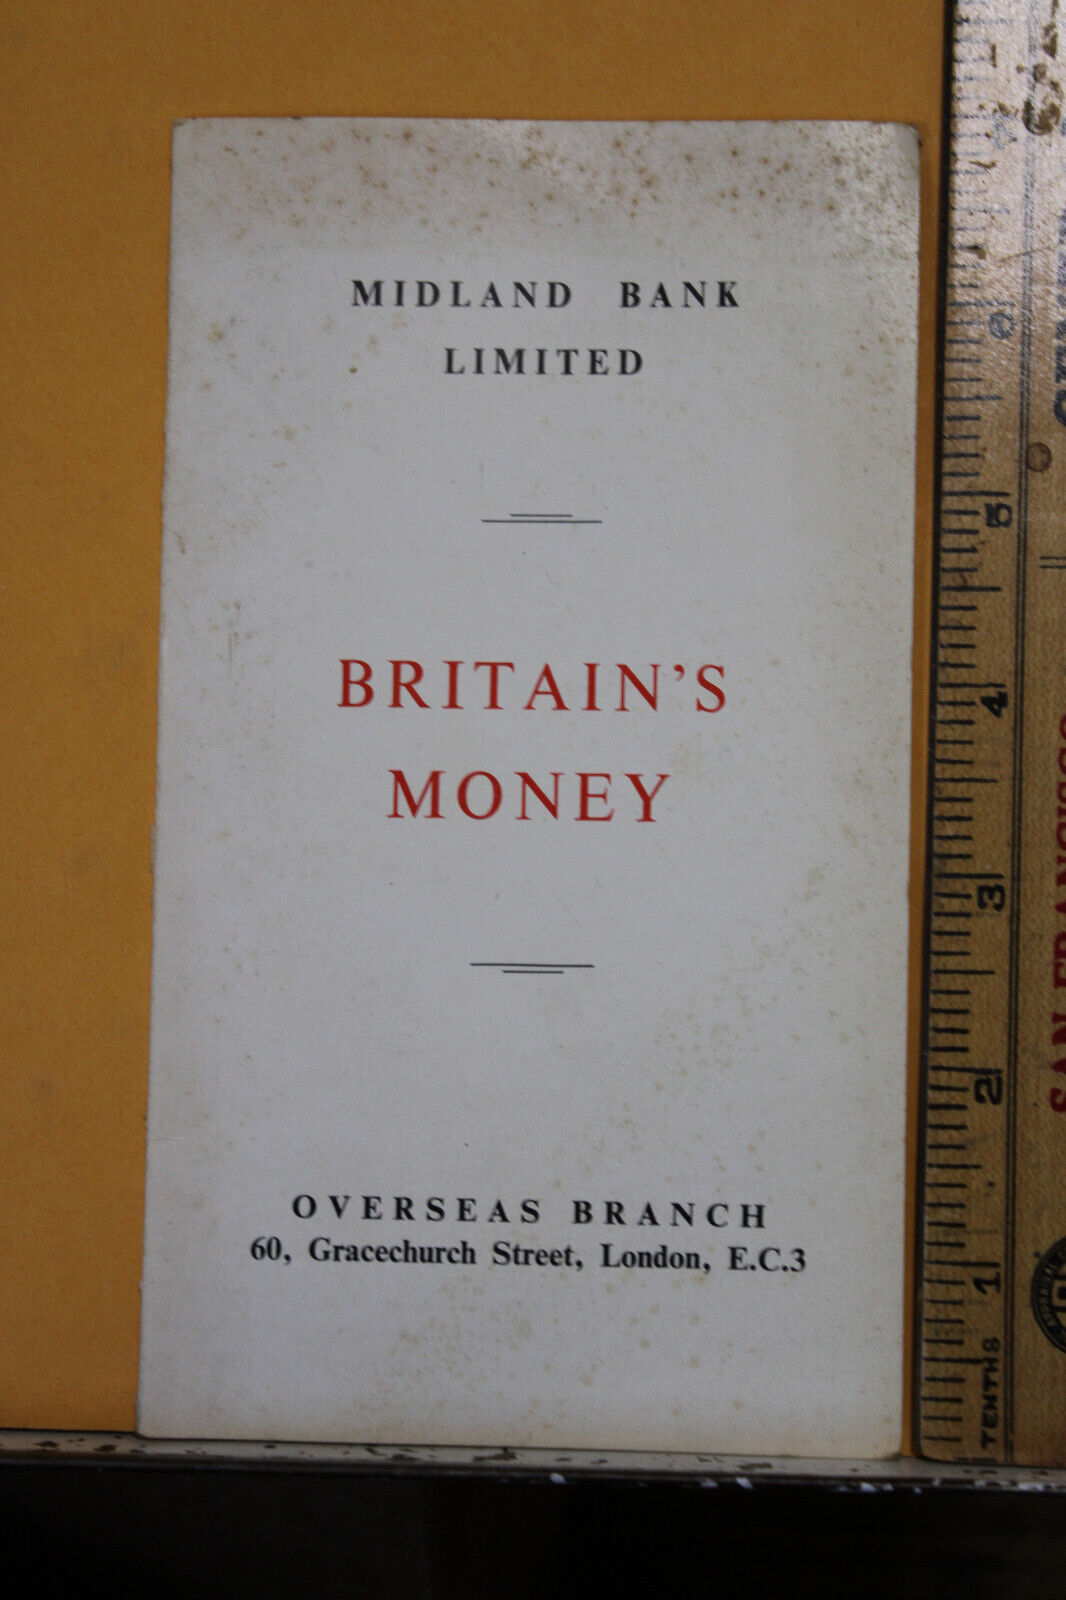 1962 Midland Bank Limited Britain\'s Money Brochure Overseas Branch Currency UK